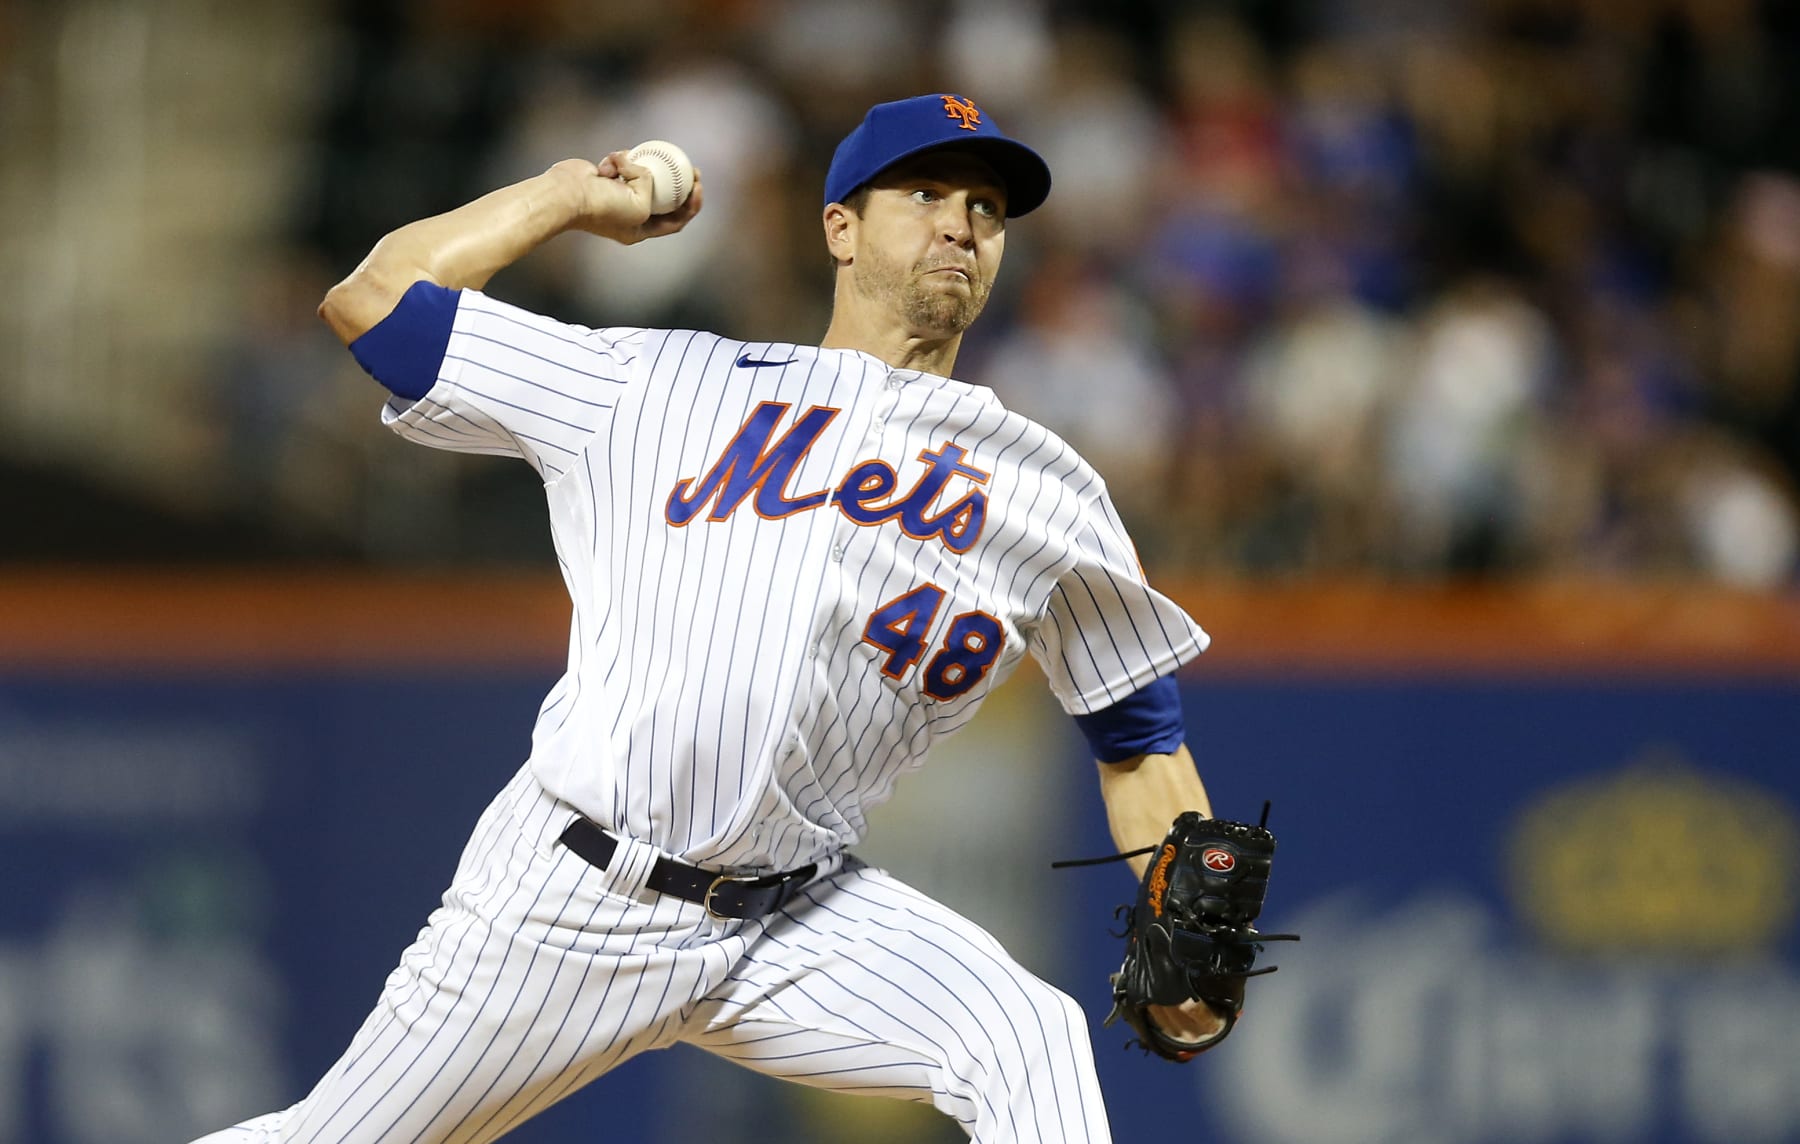 Jacob deGrom plans to opt out of contract after 2022